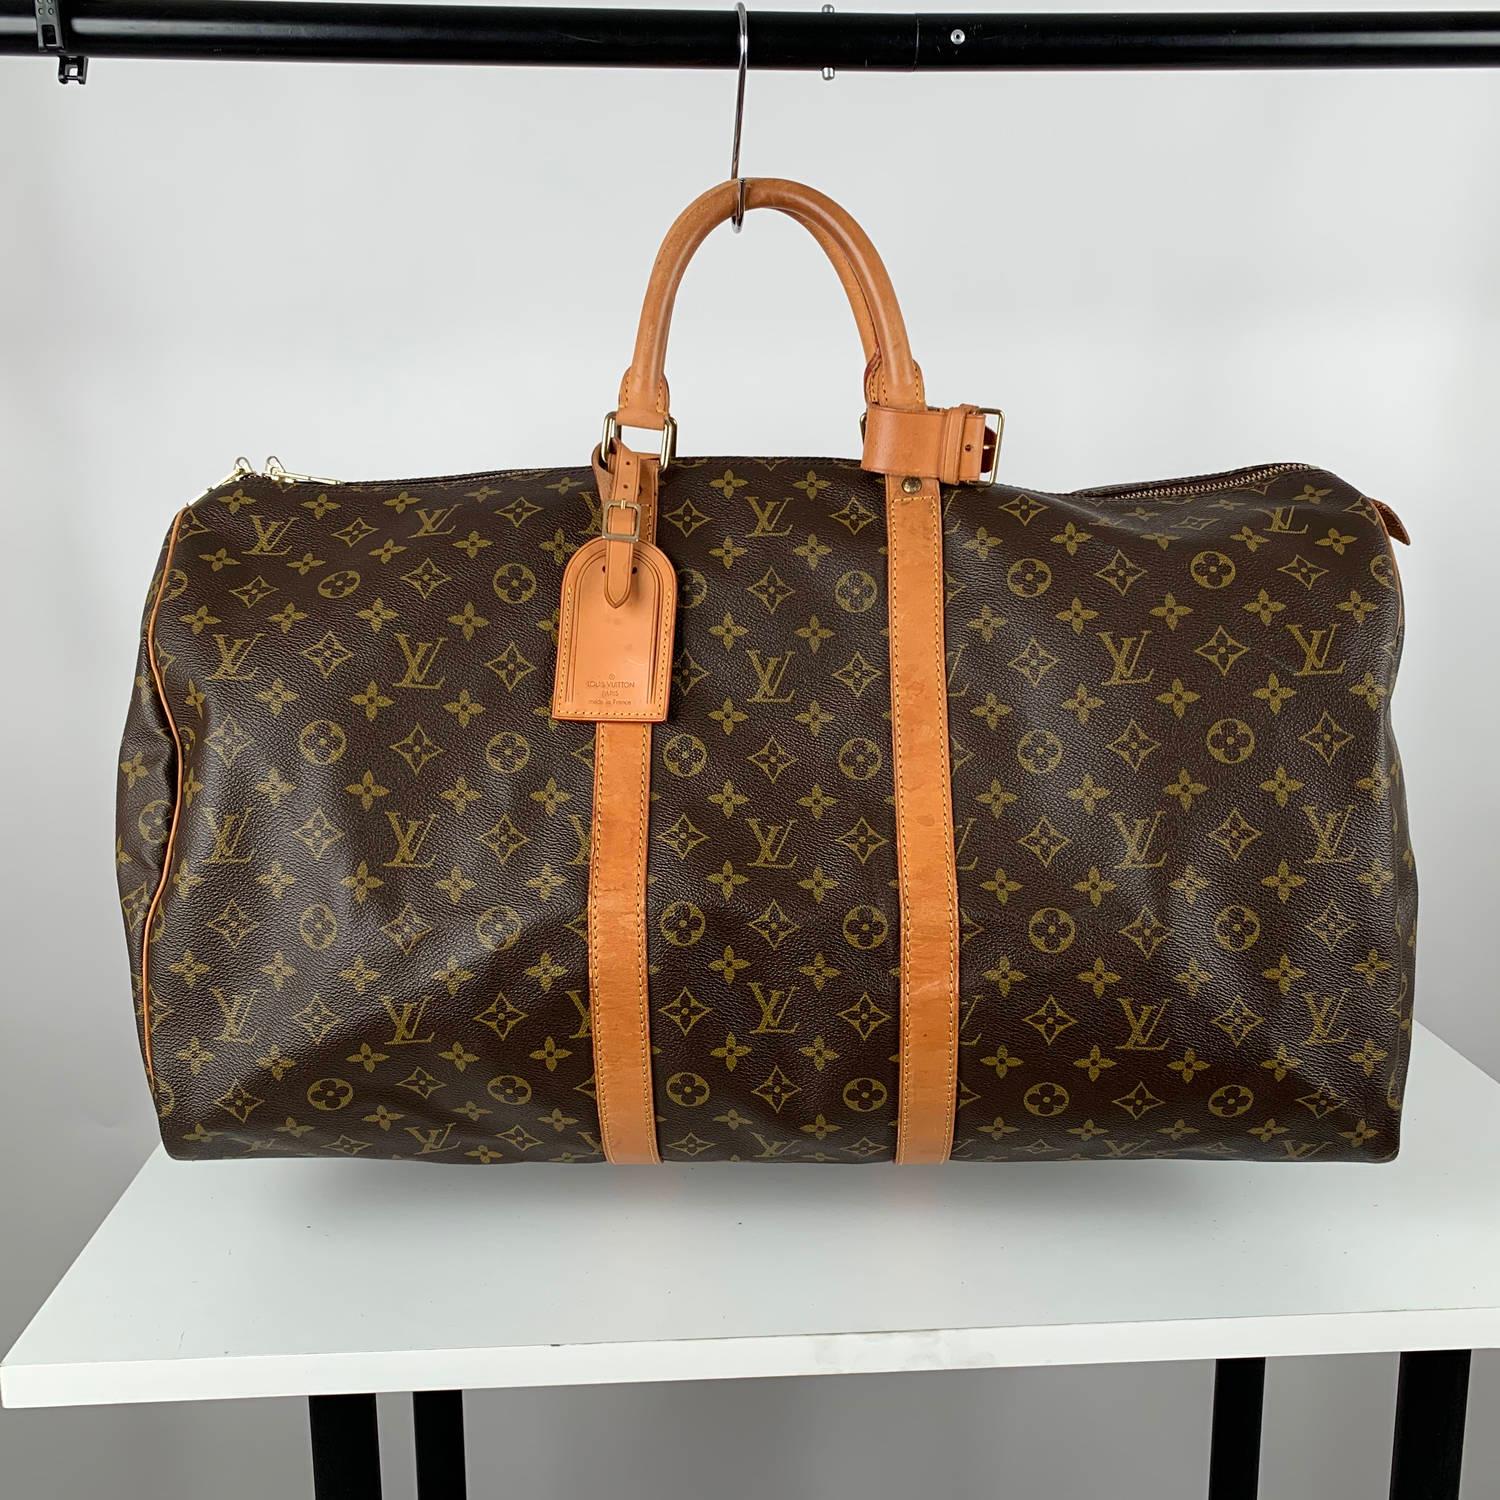 Louis Vuitton Vintage Monogram Canvas Keepall 55 Travel Bag

Material : Canvas
Color : Brown
Model : Keepall 55
Gender : Women, Men
Country of Manufacture : France
Size : Large
Bag Depth : 10 inches - 25.5 cm
Bag Height : 11.5 inches - 29,2 cm 
Bag